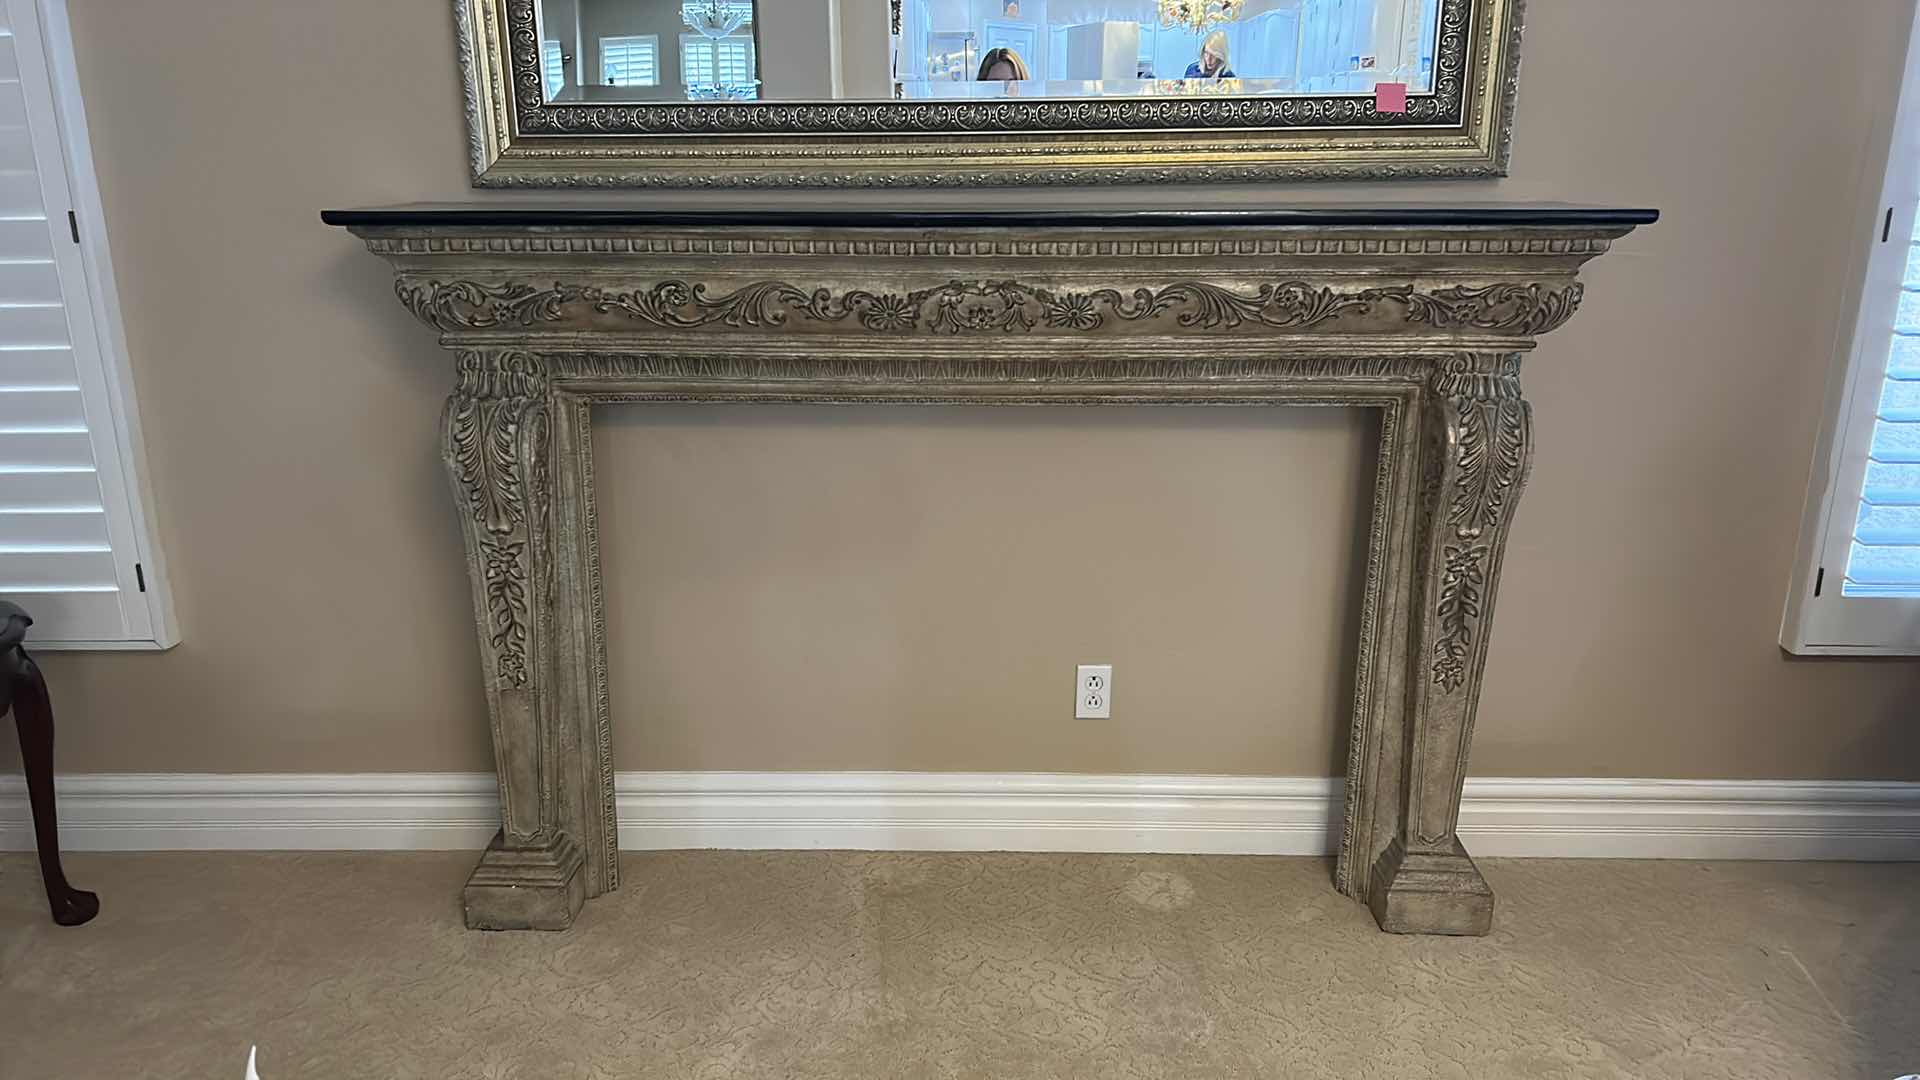 Photo 7 of OPPULANT MANTEL SURROUND WITH HEAVY BLACK MARBLE TOP 80“ x 14“ x 51“